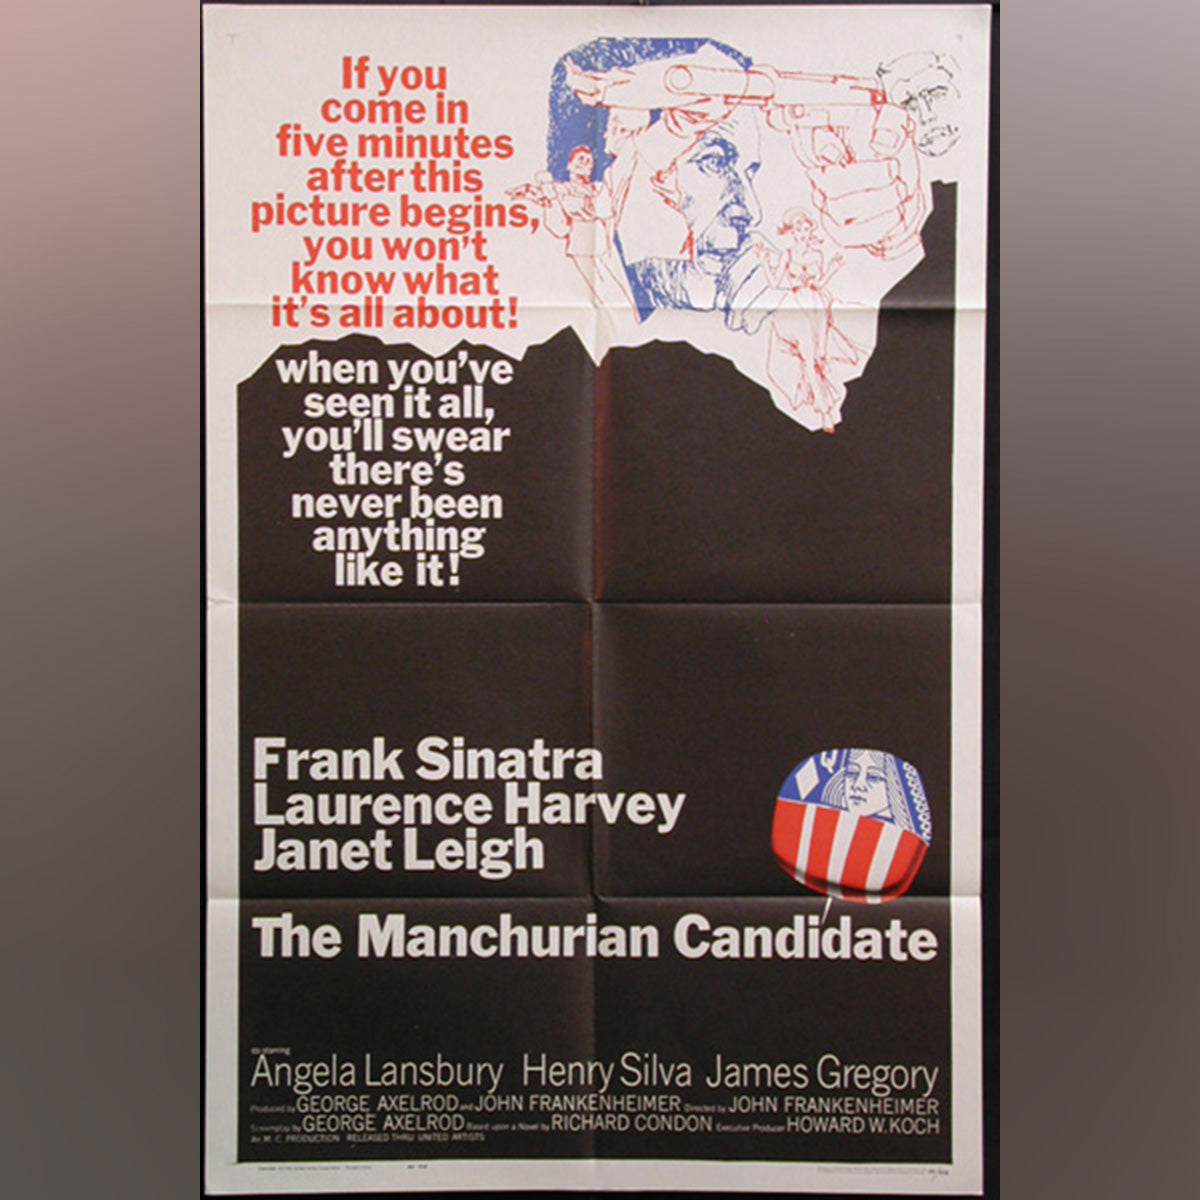 Original Movie Poster of Manchurian Candidate, The (1962)